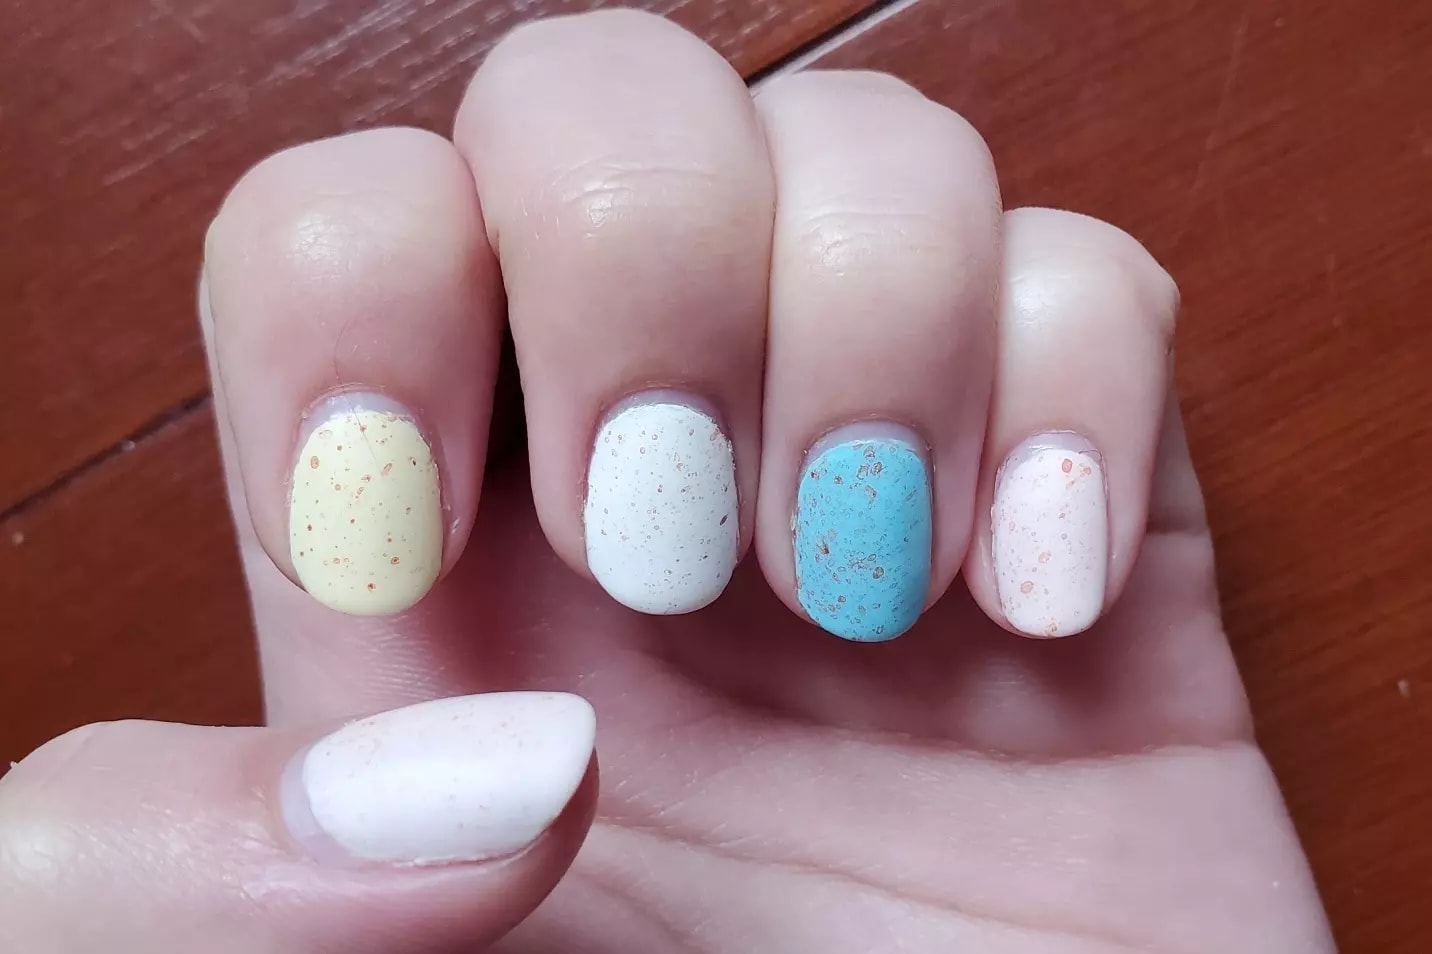 I know Easter is a month away, but I was just too excited to try Cadbury mini egg nails